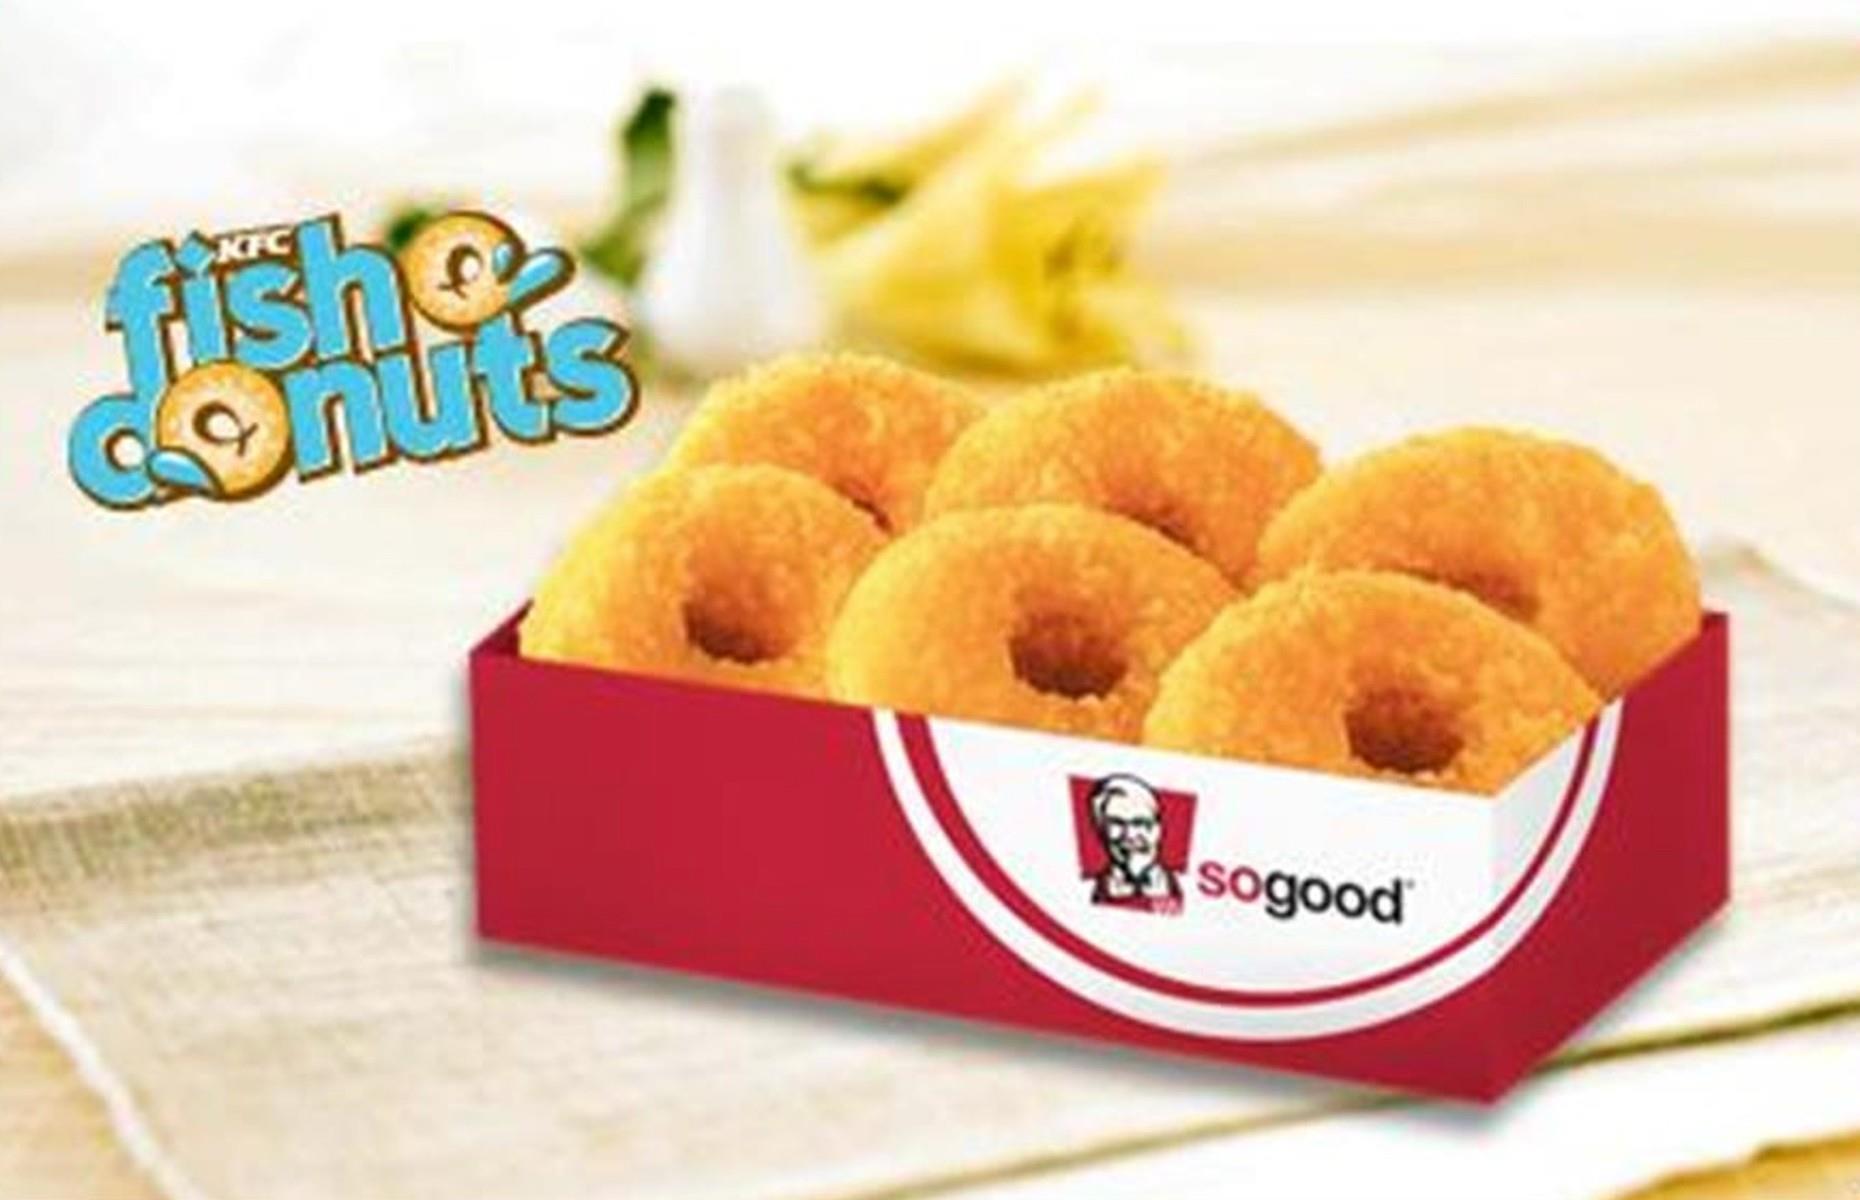 <p>Fish Donuts were savory fish cakes shaped like ring donuts, and they were sold at branches of KFC in Singapore in 2012. The savory snacks were battered and deep-fried, then seasoned with sesame seeds and served with tangy tartare sauce. Just like the sweet treat they mimicked, the savory snacks came in packs of six. The same year, the brand also sold Shrimp Stars – shrimp nuggets shaped like stars.</p>